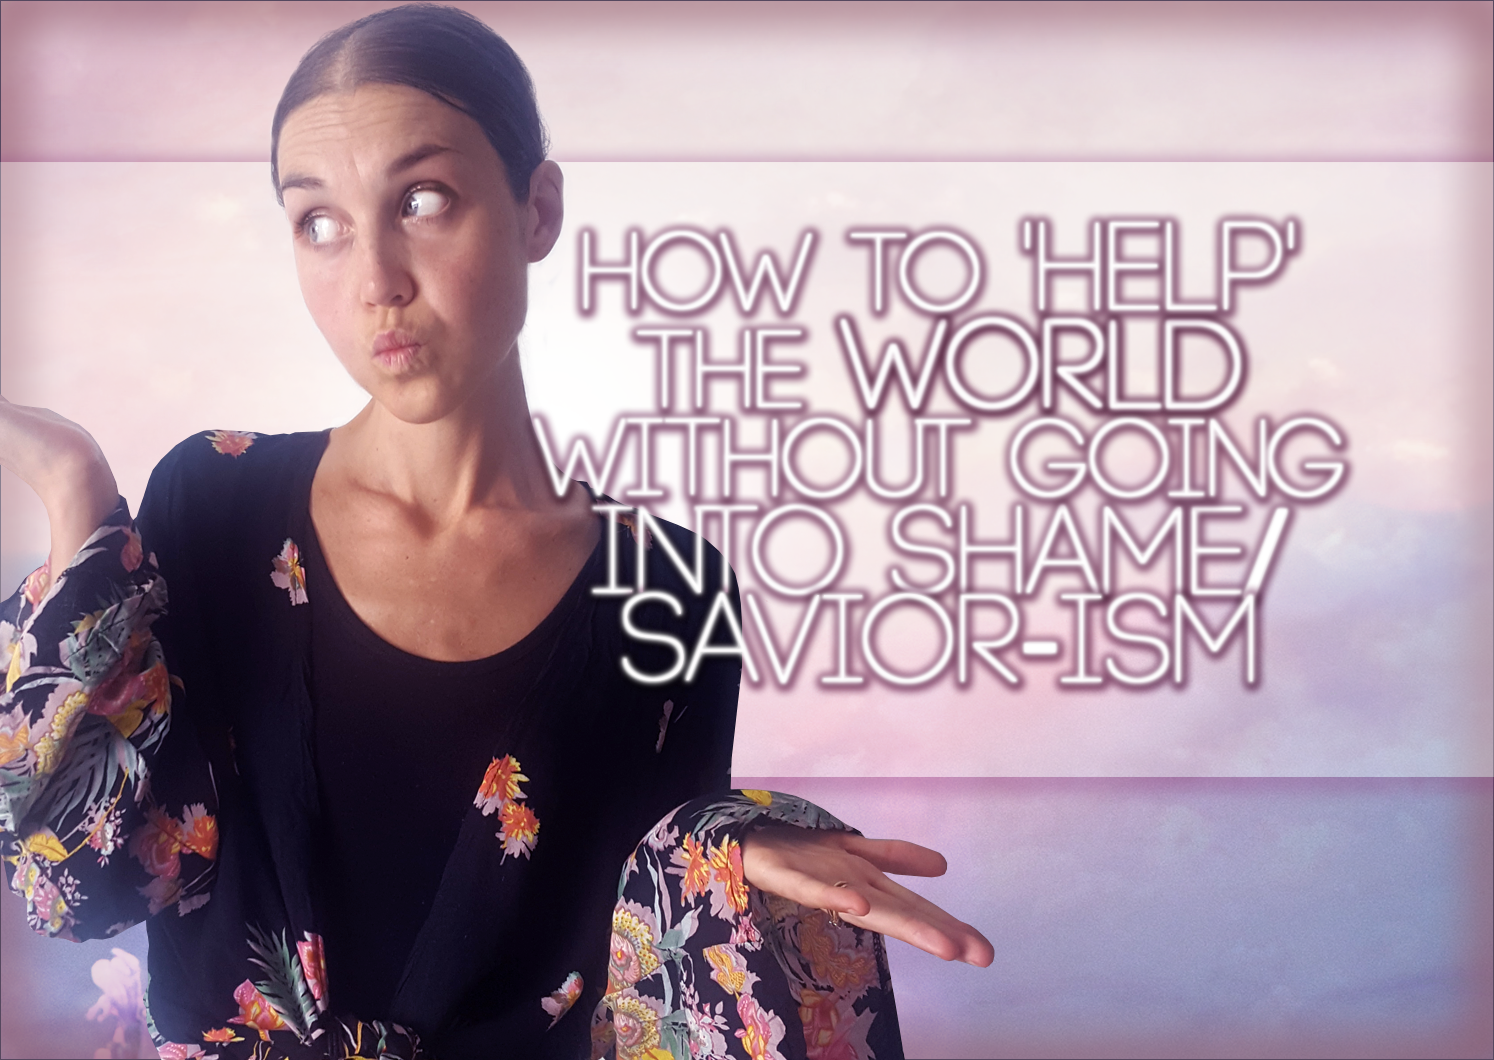 How To ‘Help’ The World Without Going Into Shame/Savior-ism